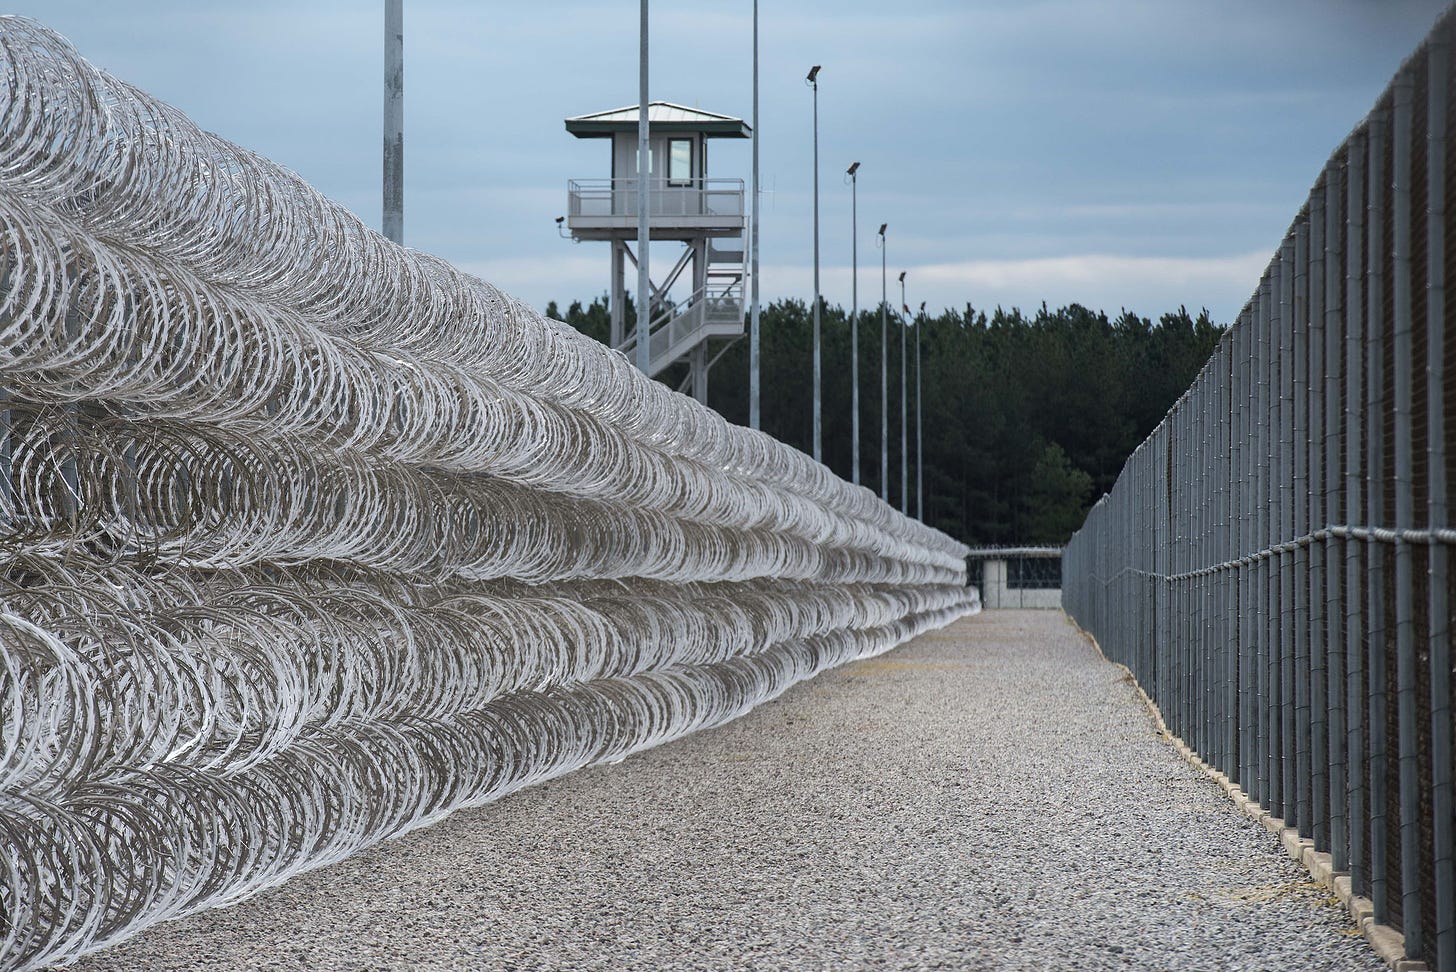 Seven inmates killed at South Carolina maximum-security prison after hours  of fighting